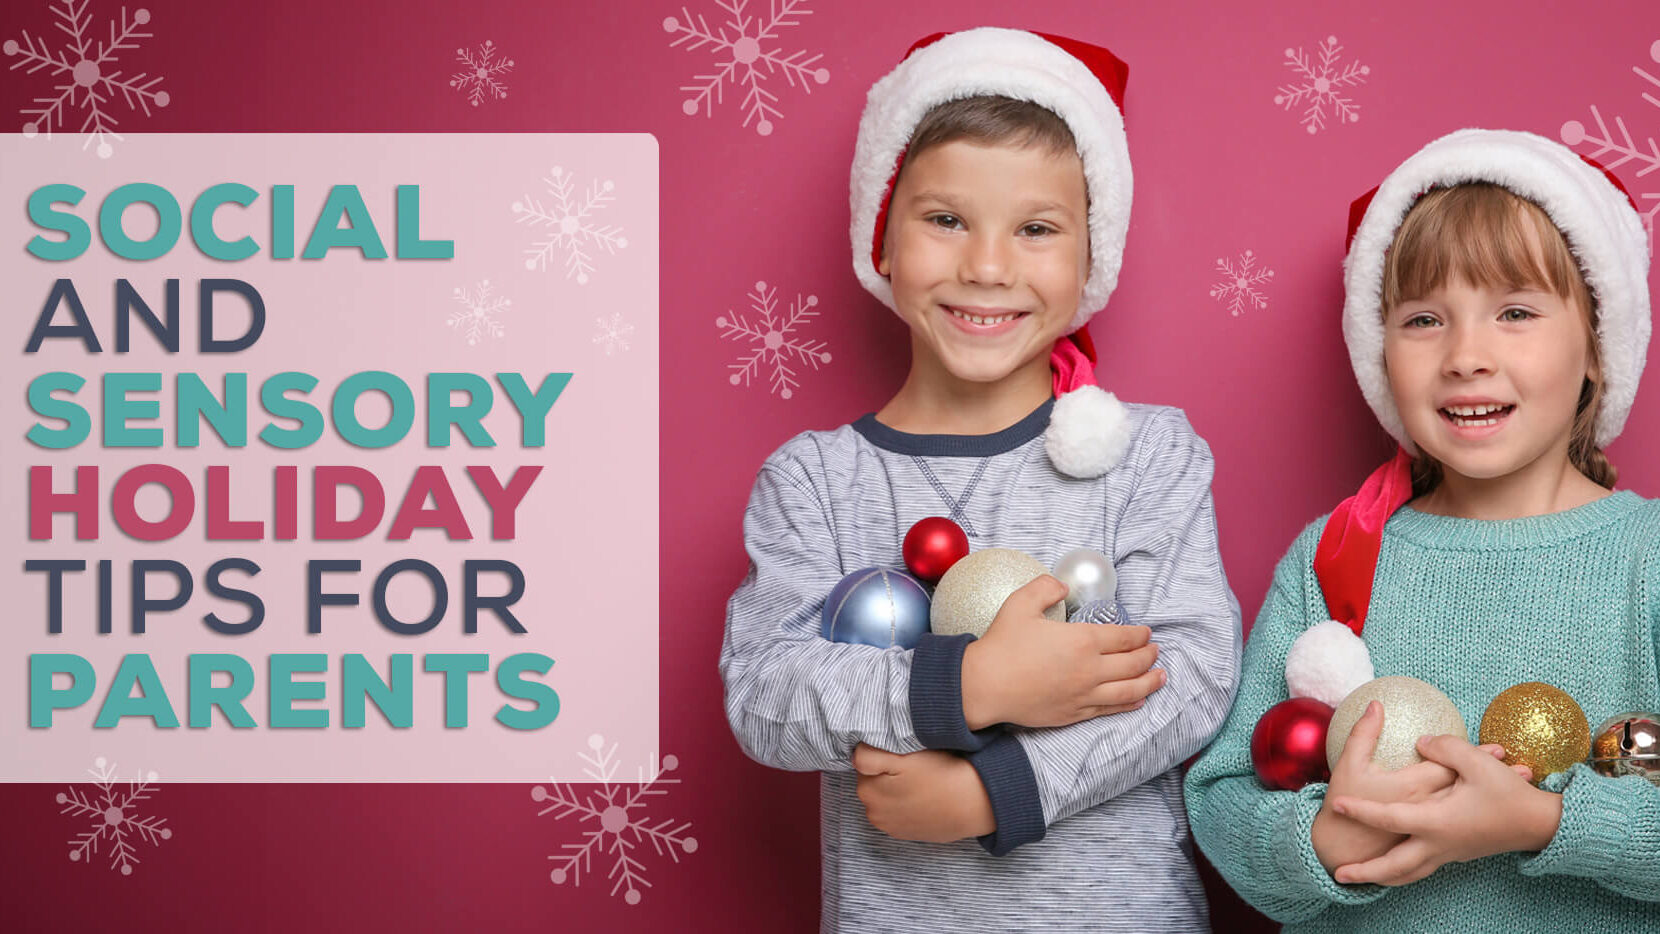 Social-and-Sensory-holiday-tips-for-parents-image